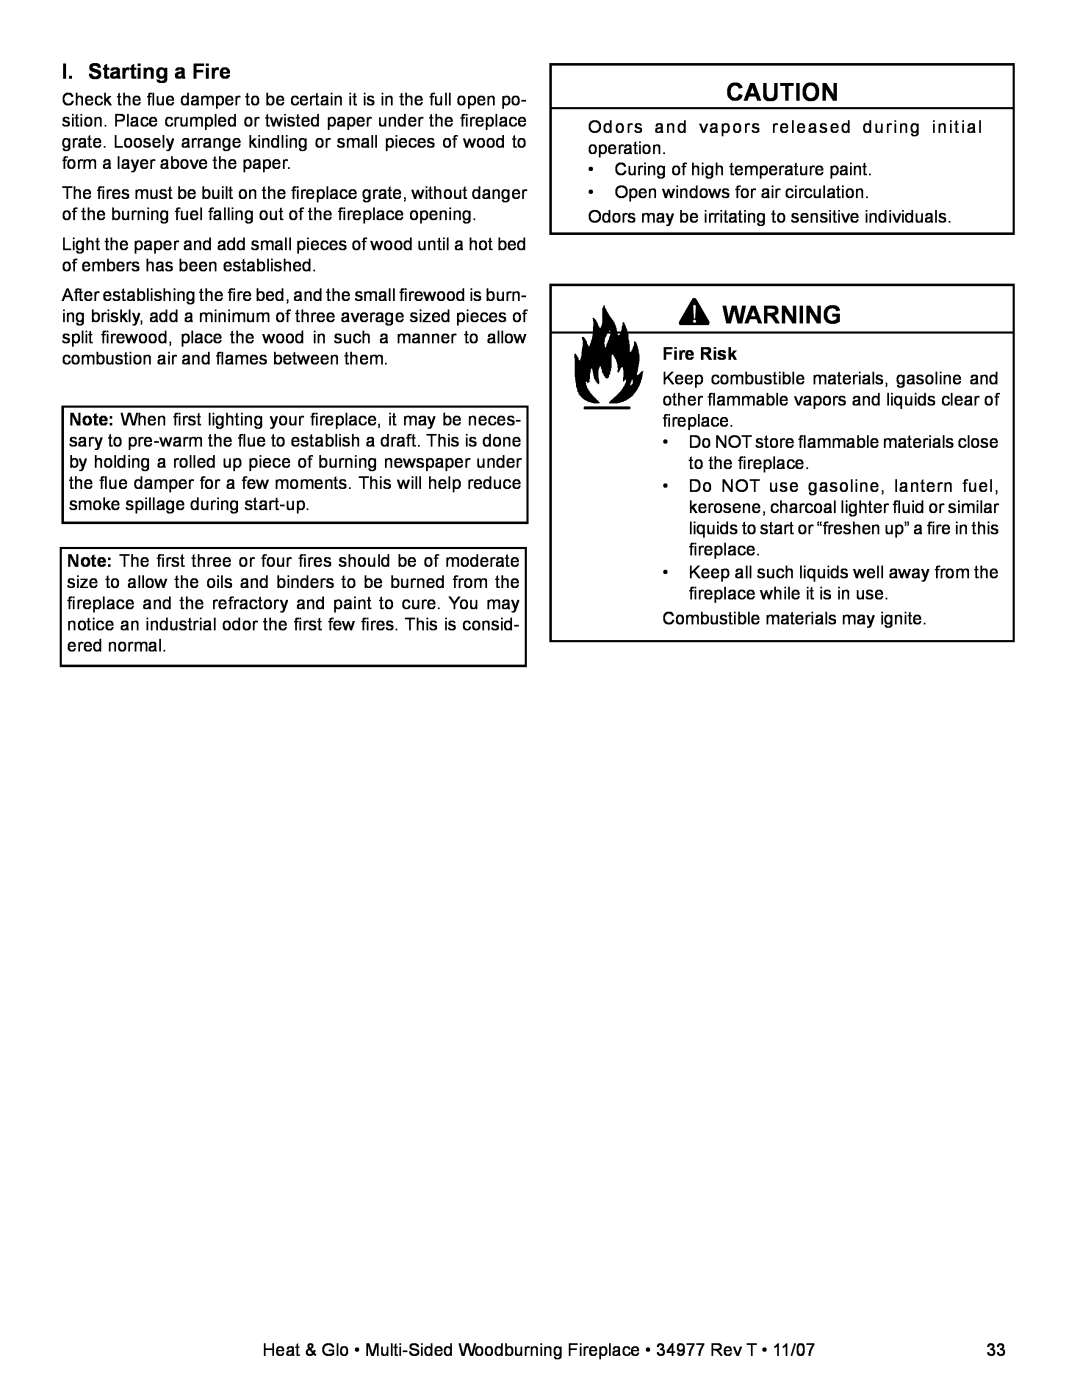 Heat & Glo LifeStyle BAY-40 owner manual I. Starting a Fire, Fire Risk 